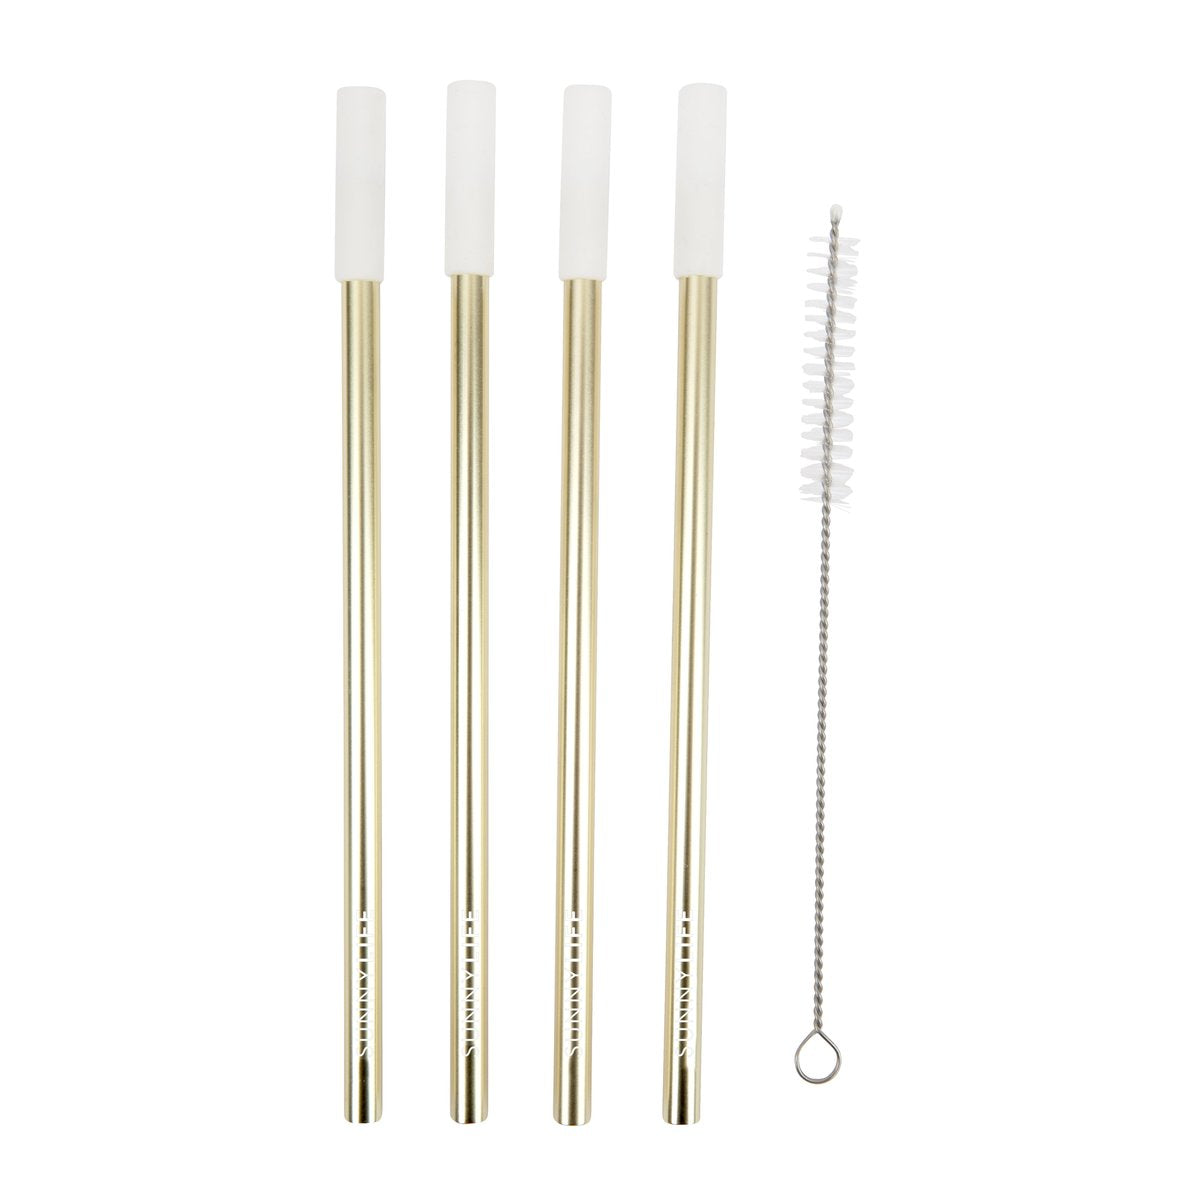 SunnyLife Reusable Metal and Silicone Straws - Gold and White